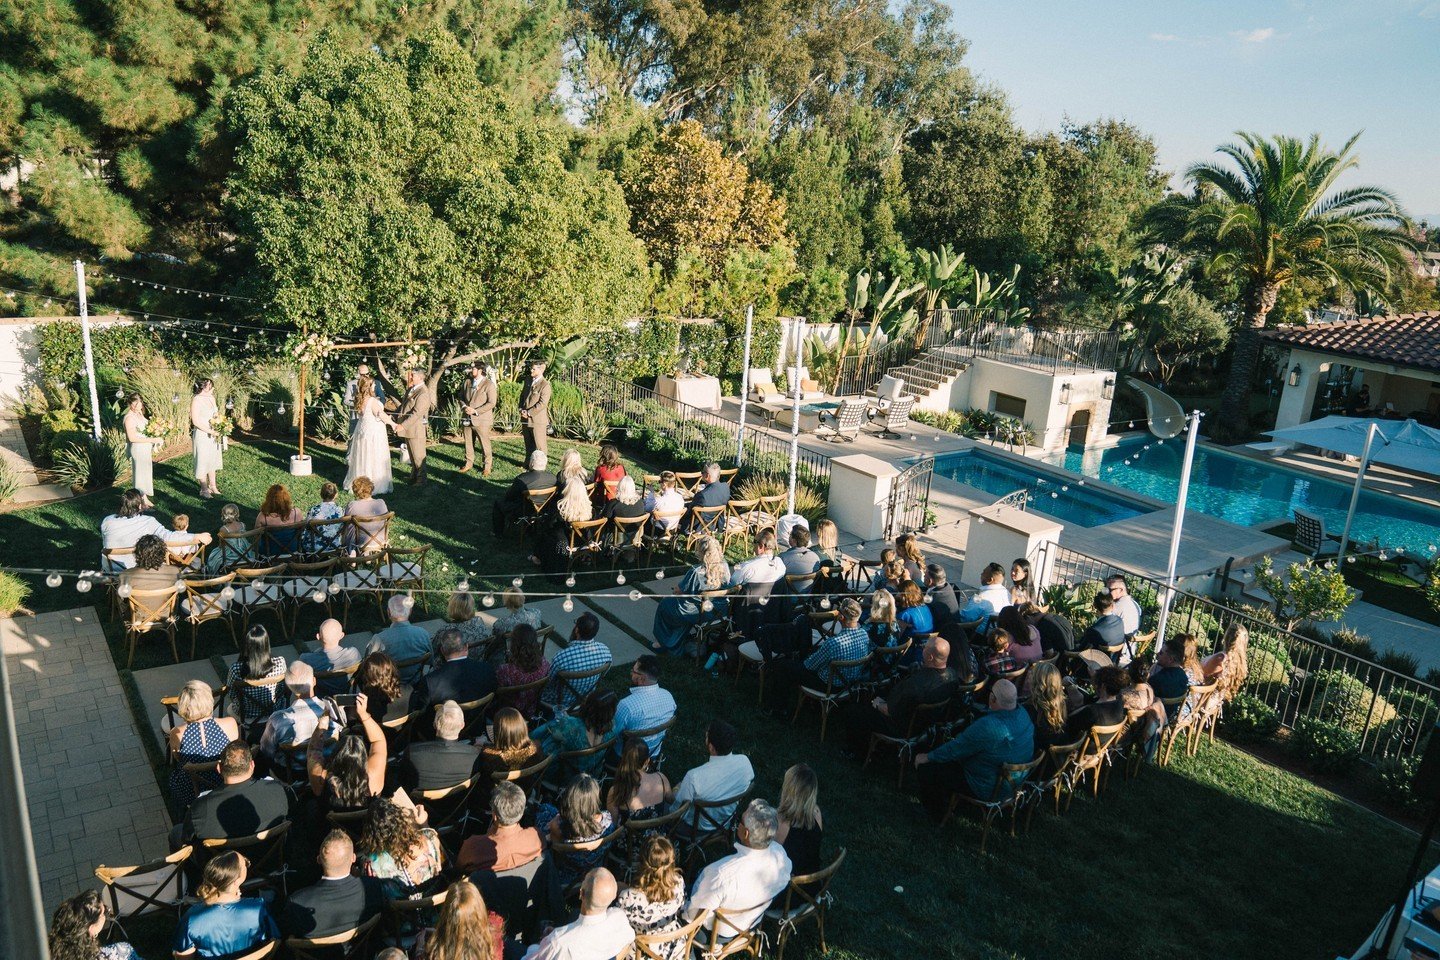 That time we transformed the groom's best friend's home into our client's dream backyard wedding...

Wedding Planner @taylordeckerevents 
Photography @agajones 
Catering @calieventco 
Bartending @drinks.with.fonz 
DJ + Emcee @secondsong_official 
Flo